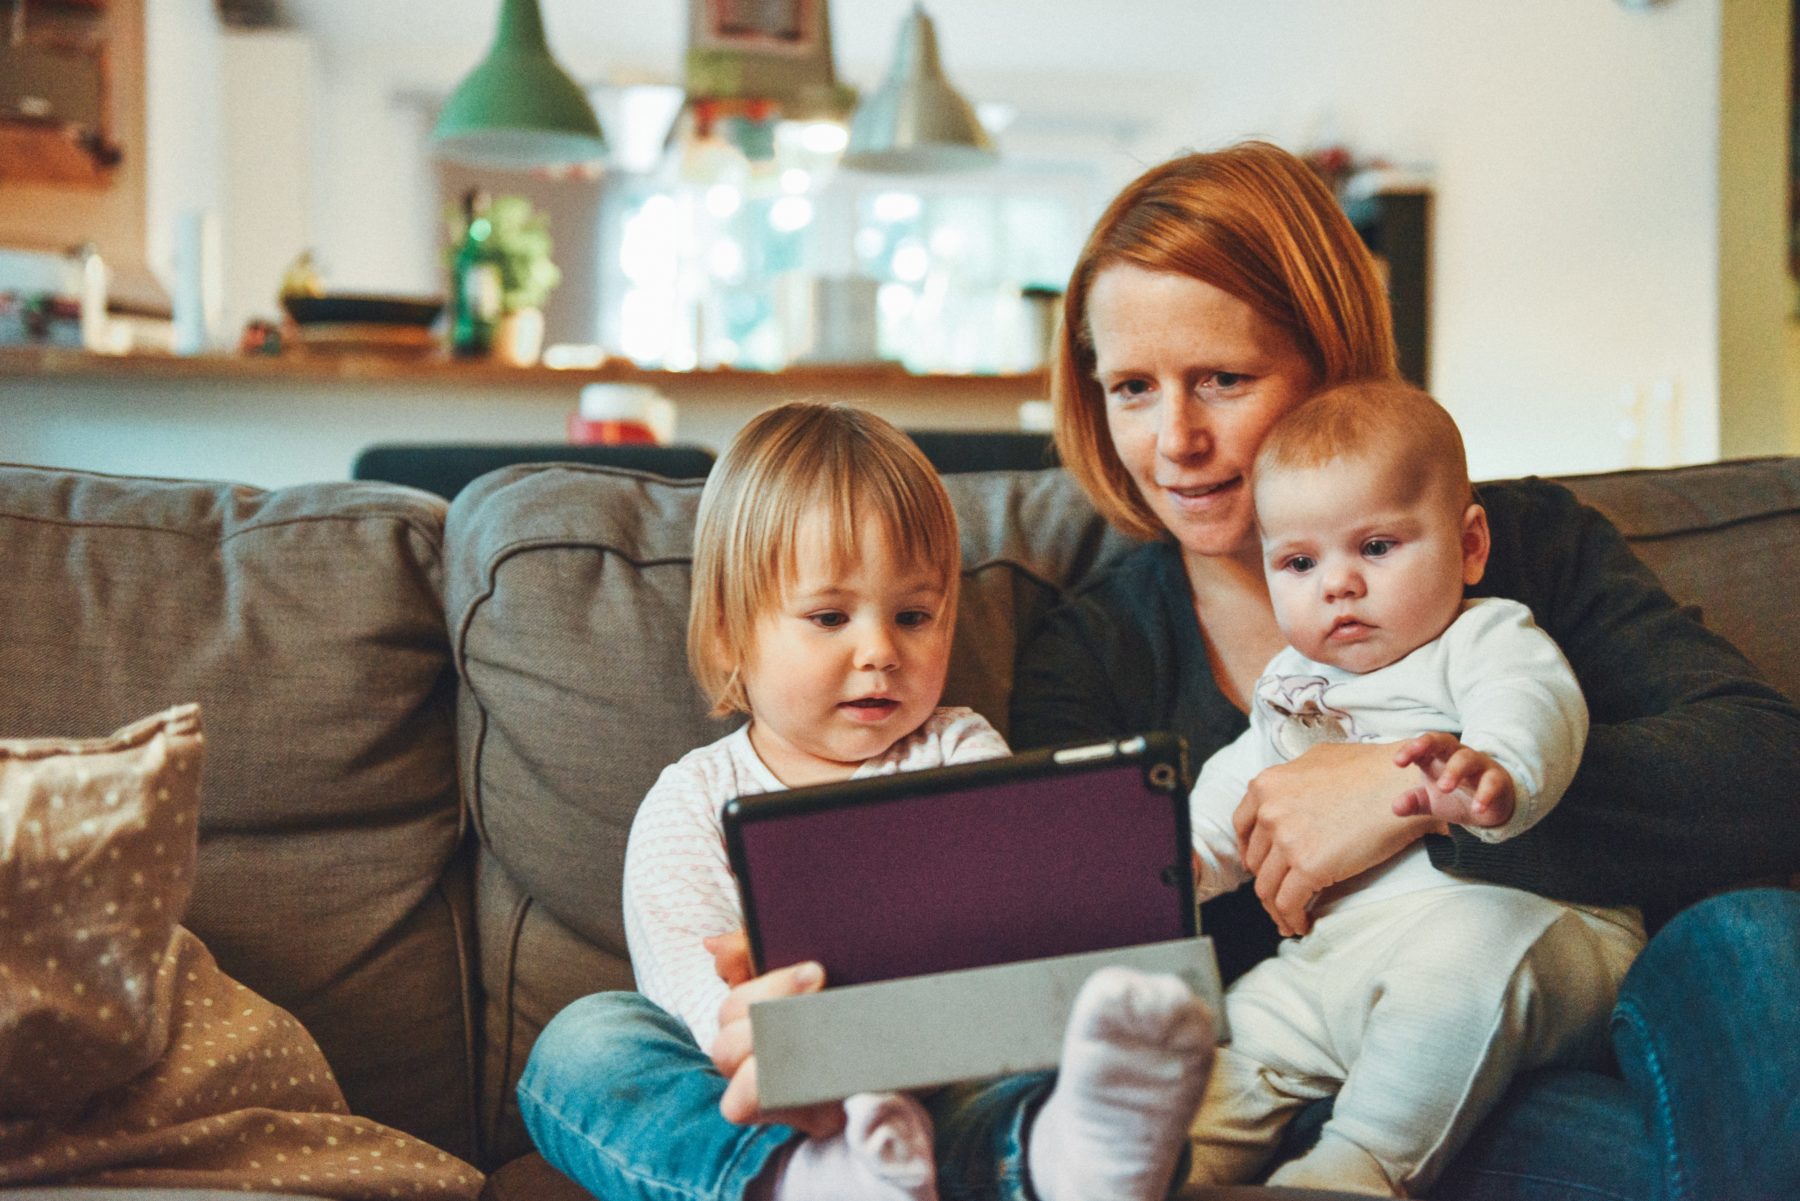 Mother with baby and toddler on couch looking at tablet